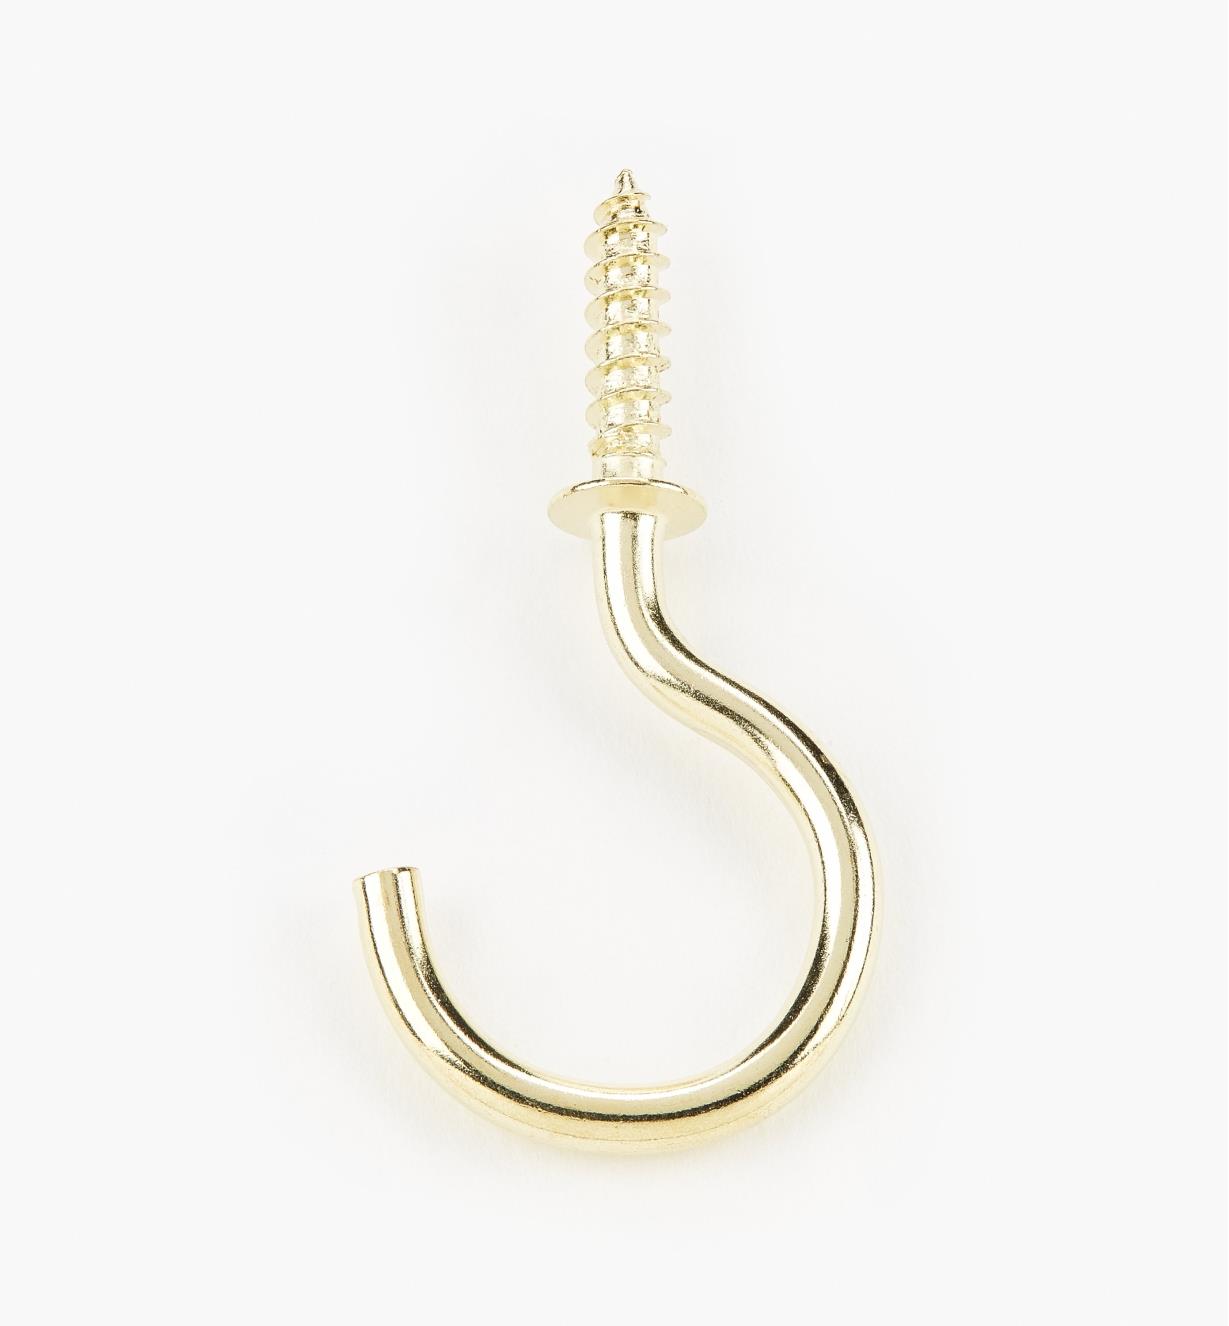 00S5624 - 1 1/4" Brass-Plated Cup Hooks (50)